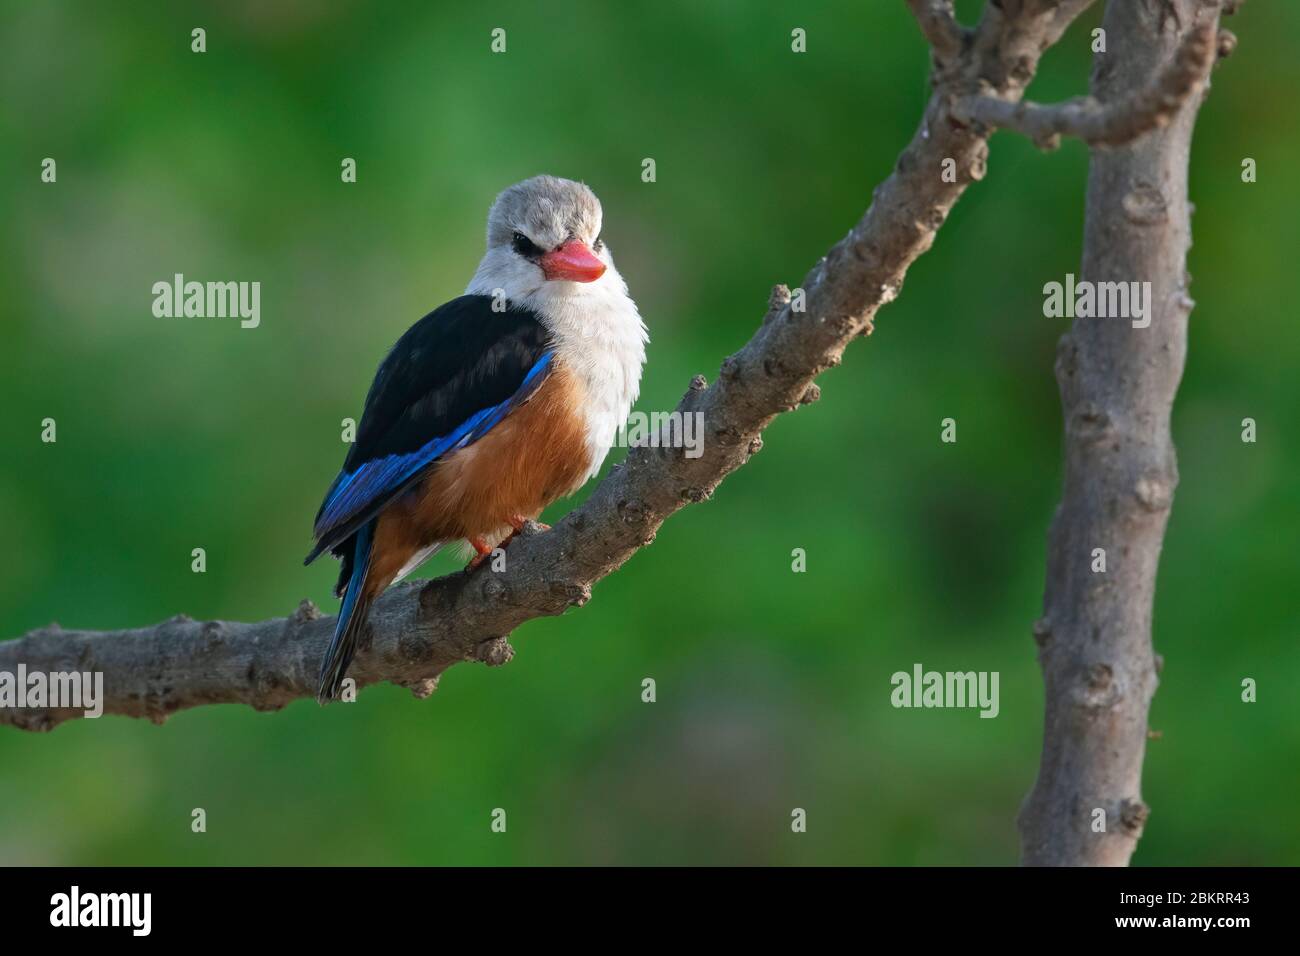 Grey-headed kingfisher (Halcyon leucocephala) perched in tree, native to Africa and Arabia Stock Photo